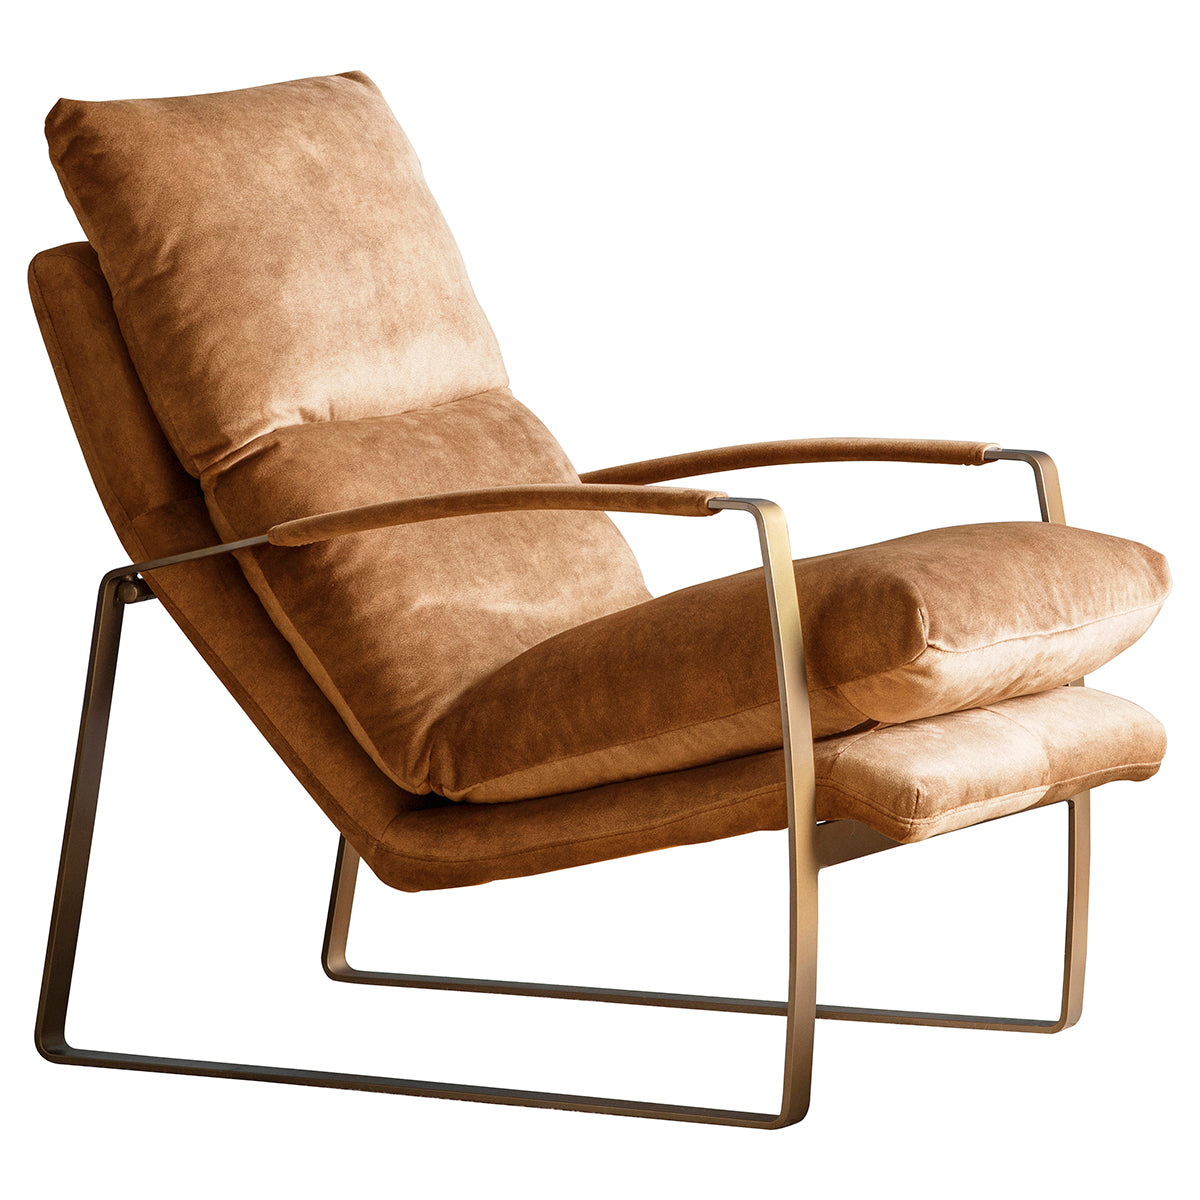 A Huish Lounger Ochre with a metal frame, ideal for home furniture and interior decor.